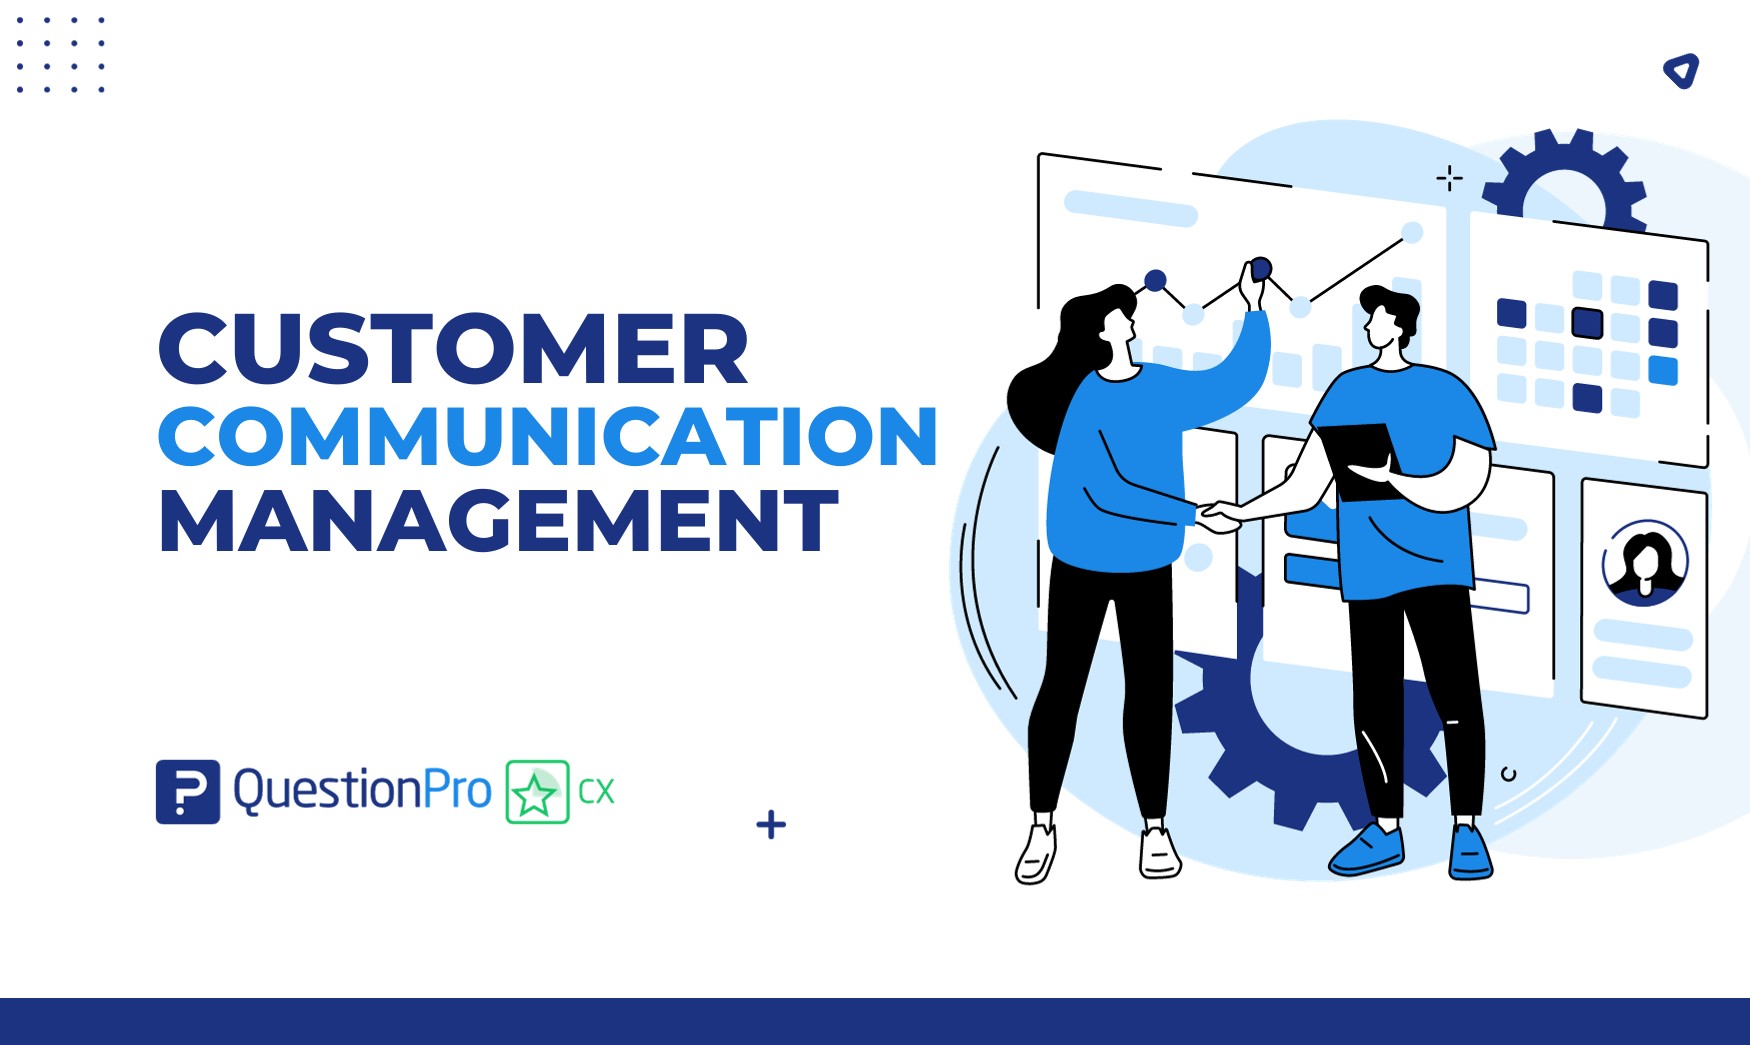 Customer Communication Management improves your interaction with customers. Learn how you can improve your customer communication.